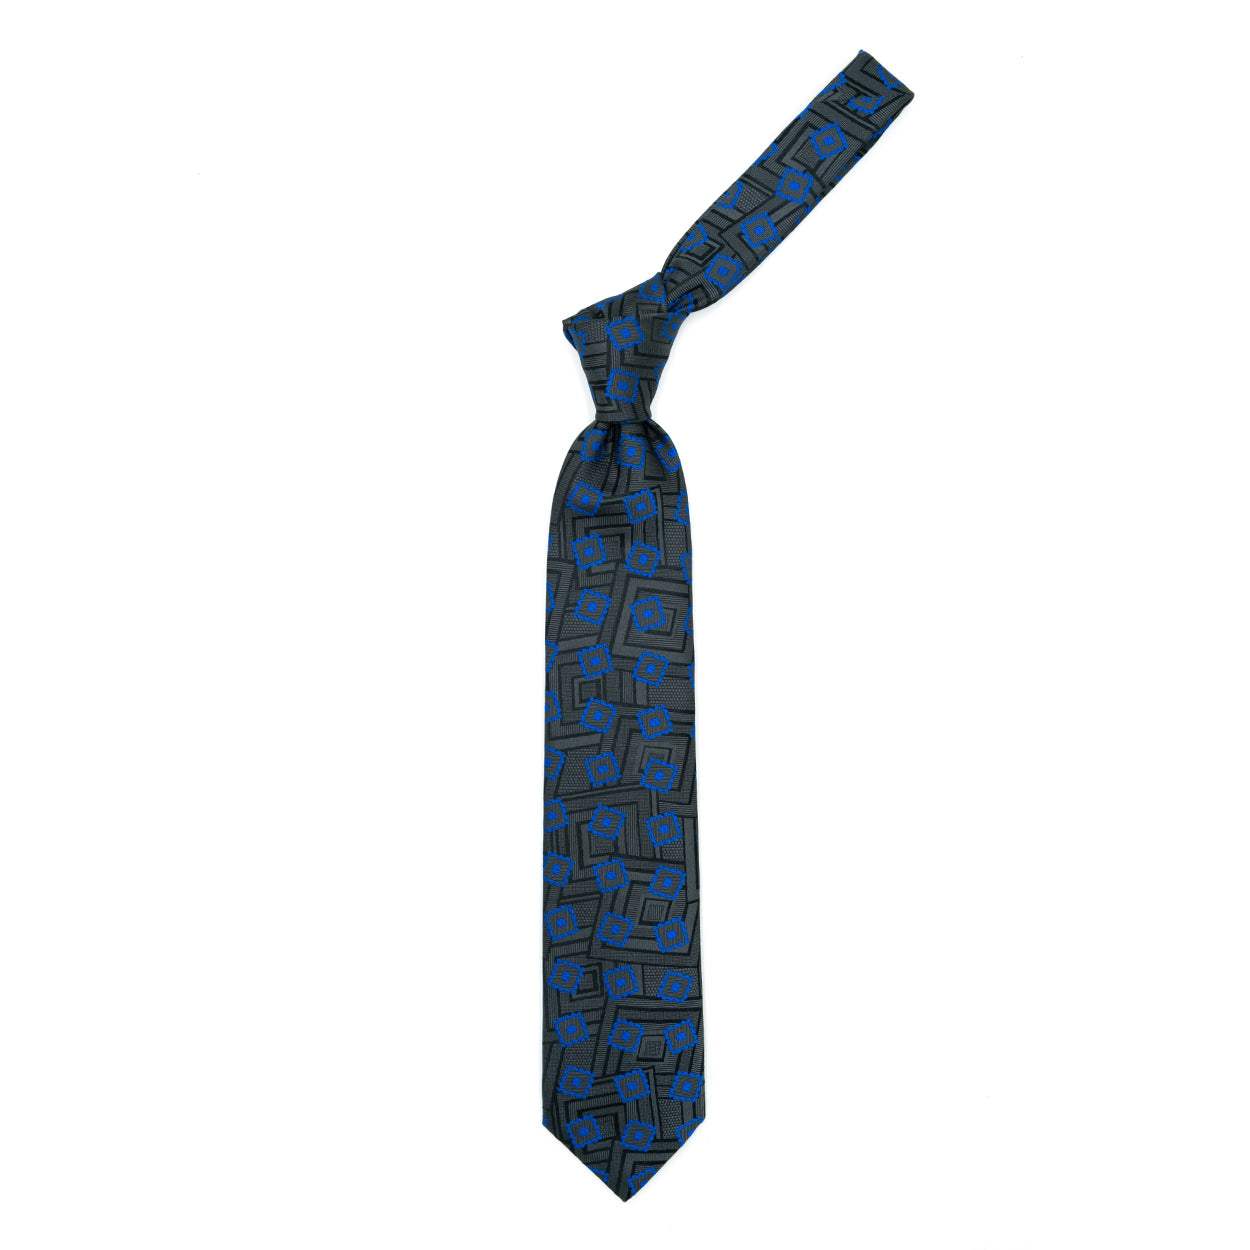 Black tie with tone-on-tone squares and electric blue